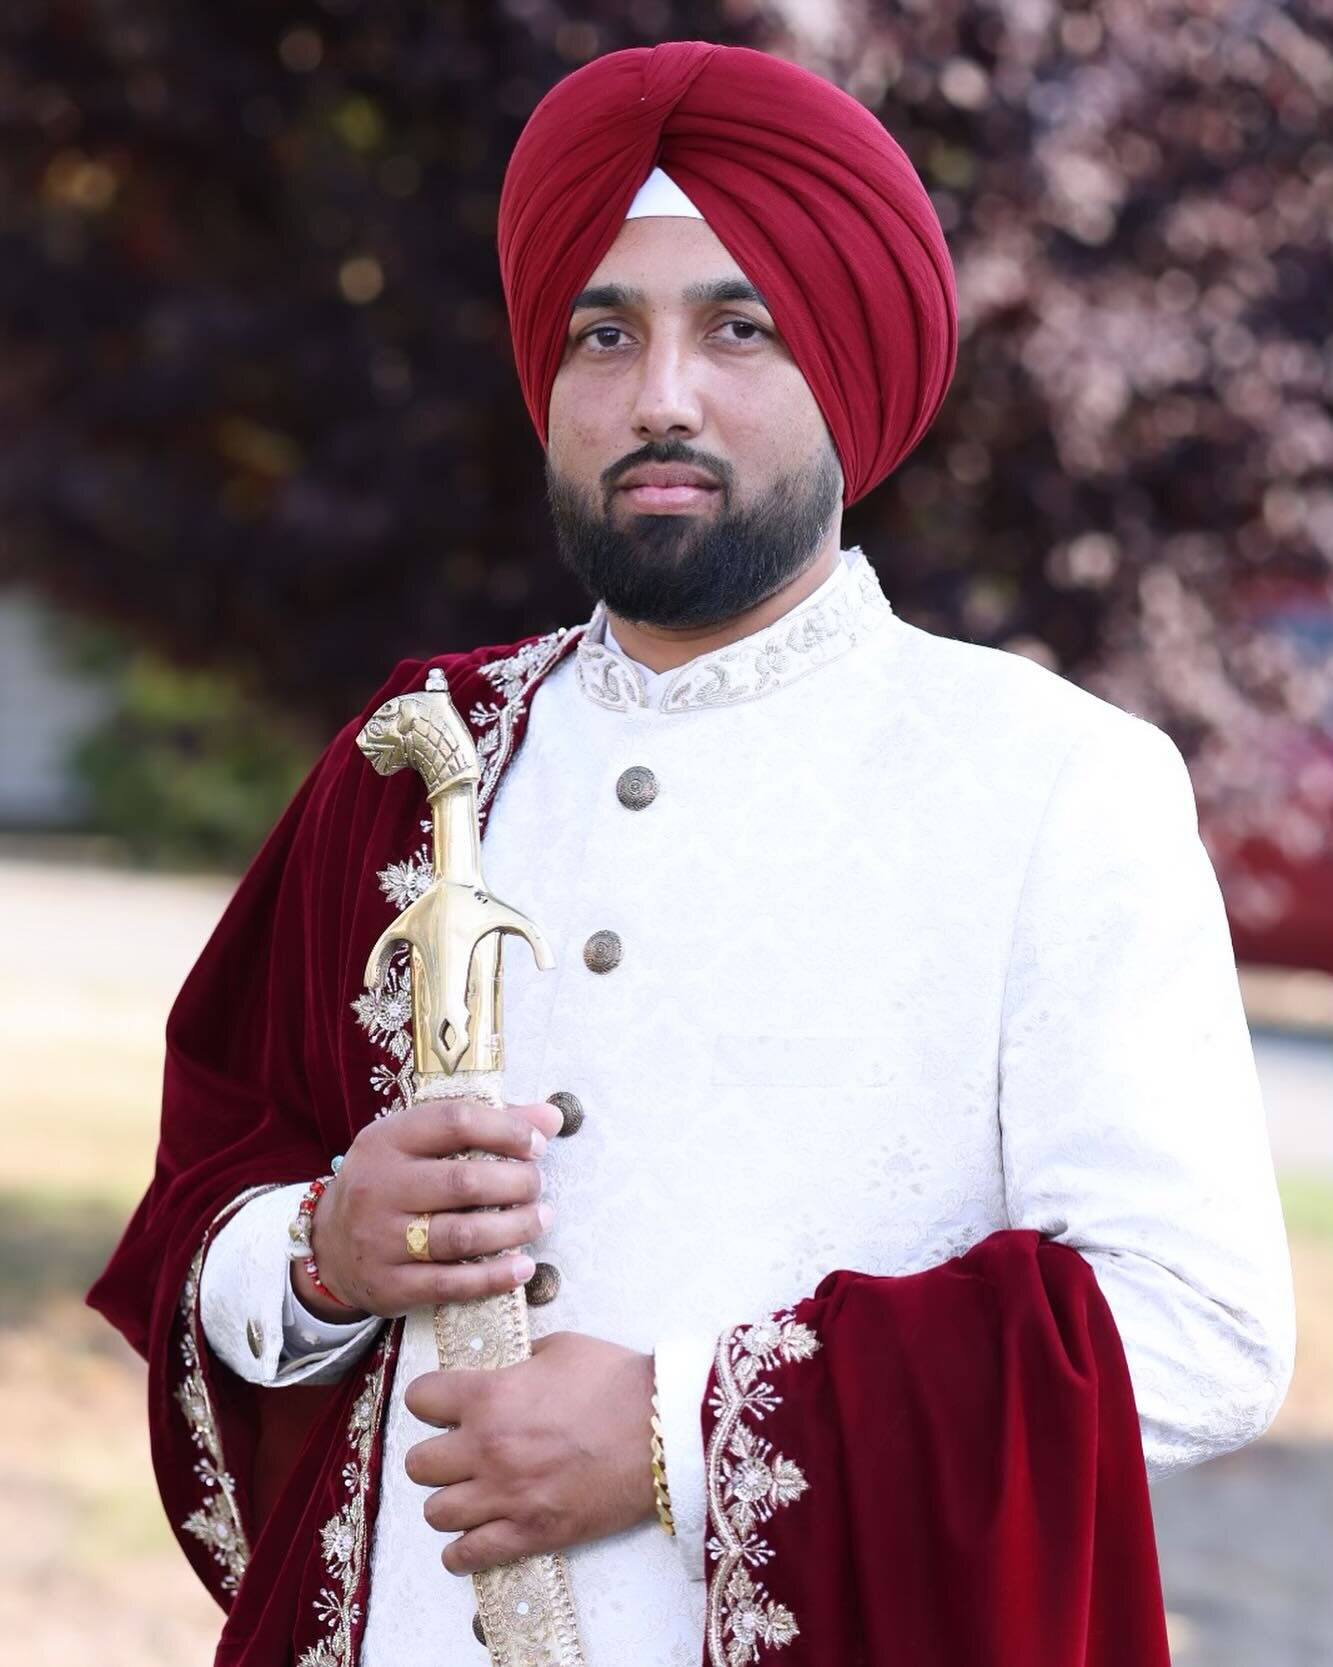 DM to book!
WE SPECIALIZE IN TYING ALL KINDS OF TURBAN STYLES &amp; SAFA STYLES FOR ANY KIND OF OCCASION
#seattle #pnw #usa #fyp #pagg #sikh #punjabi #desi #surrey #brampton #trend #trending #viral #smallbusiness #support